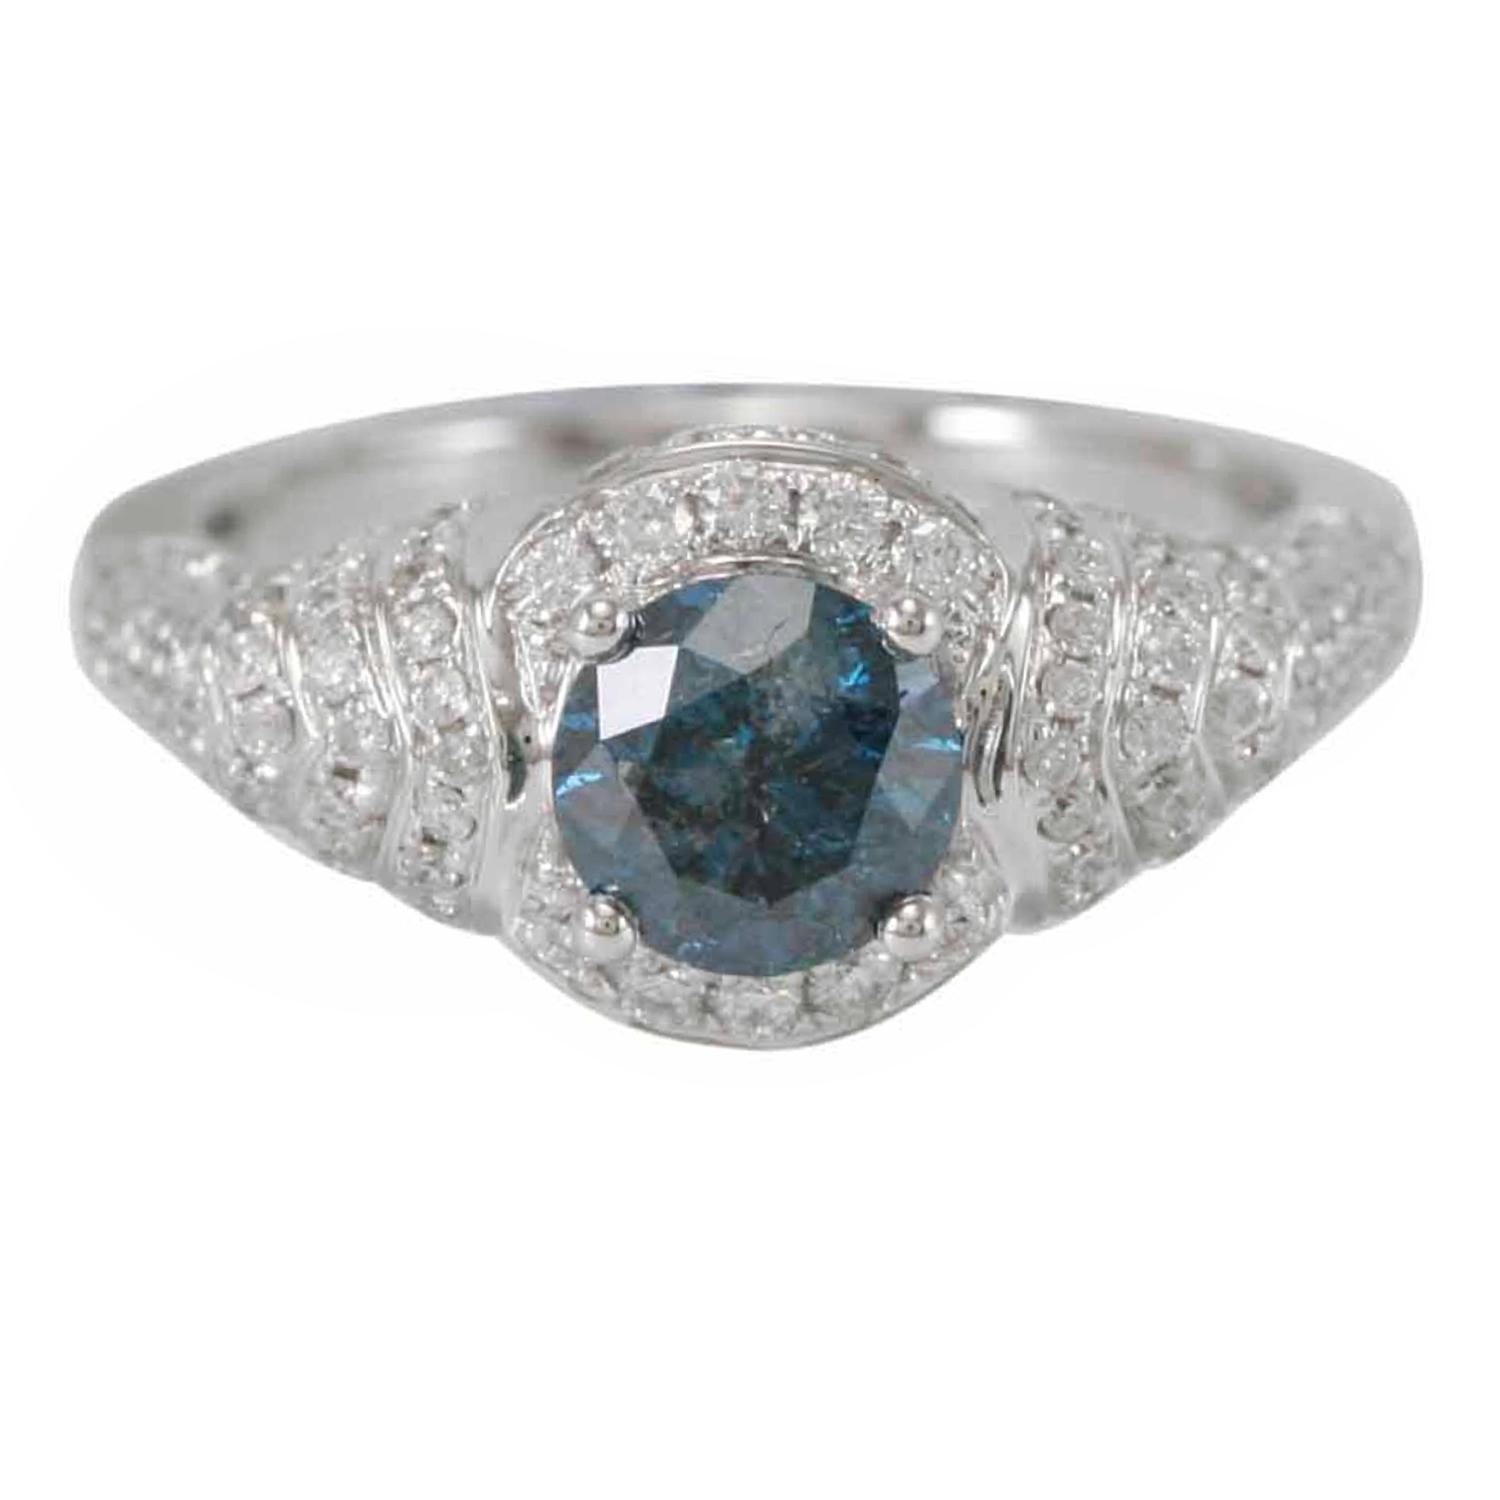 This stunning, one-of-a-kind ring from the Suzy Levian Limited Edition collection features a gorgeous round-cut, blue diamond (1.17ct) center stone with an array of white diamond (.79cttw) accents, handset in a 14k white gold setting. French